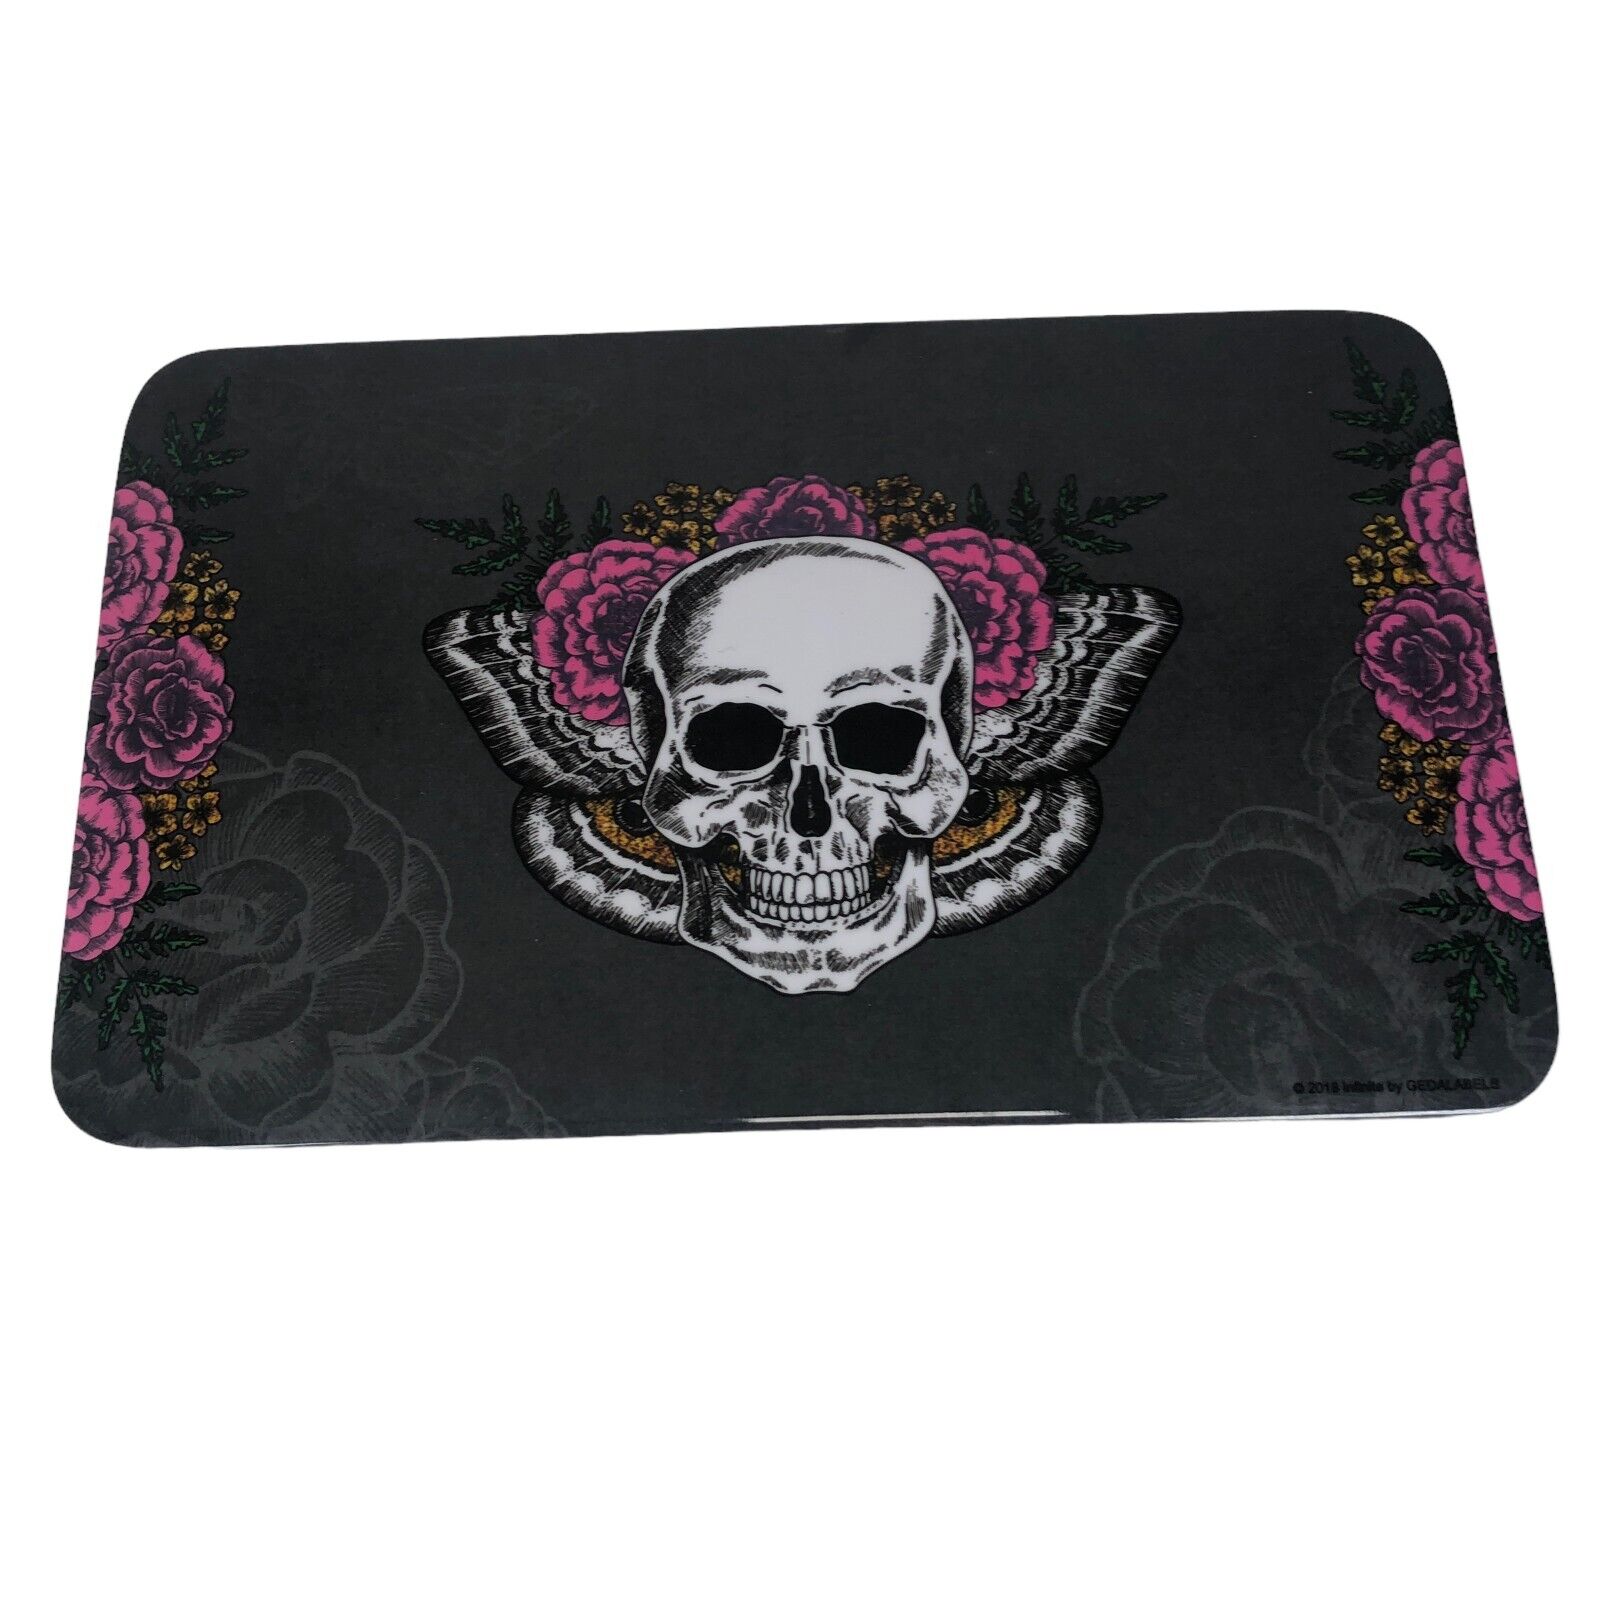 Skull, Roses & Moth Butterfly Gray Plastic Mouse Pad Desk Office Goth Punk Metal